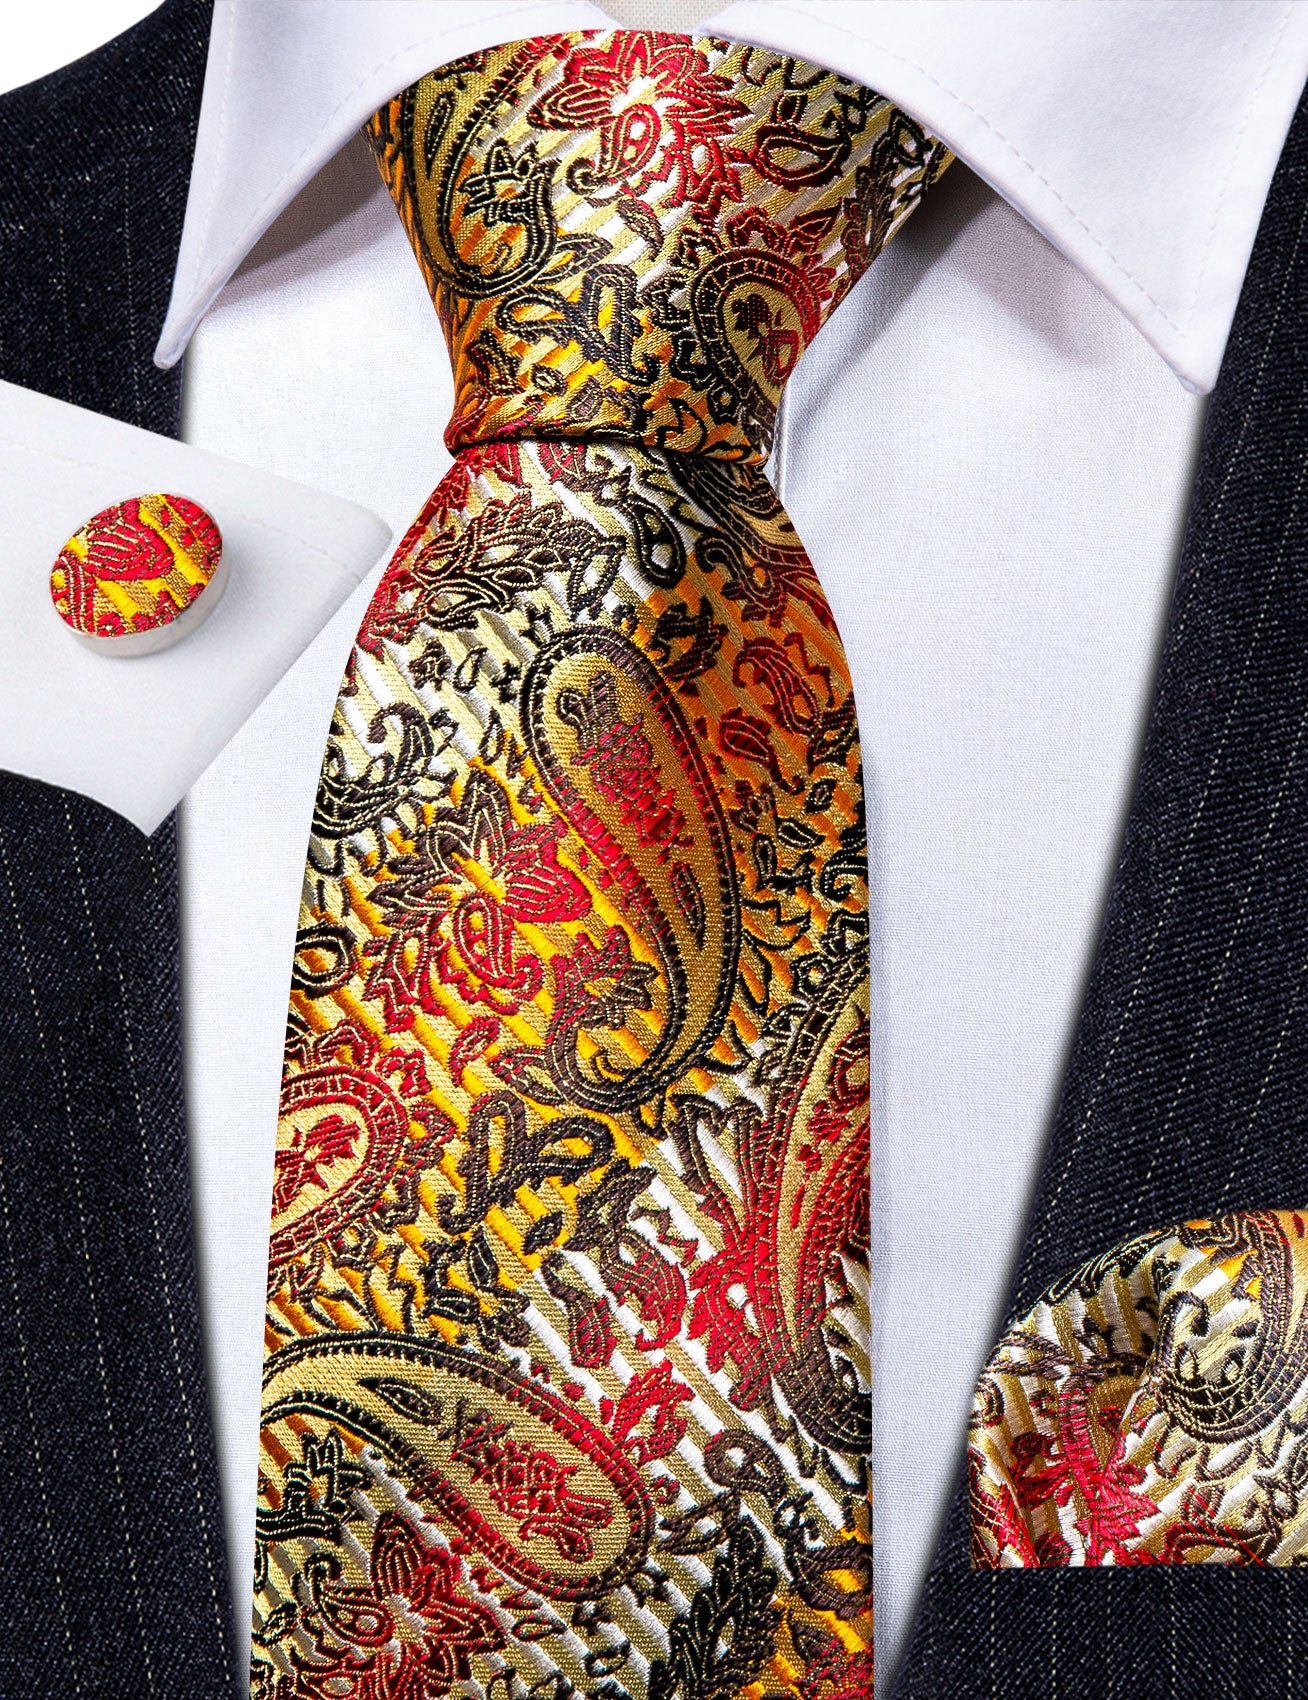 Colorful Gold Back Paisley Silk Tie Pocket Square Cufflinks Set